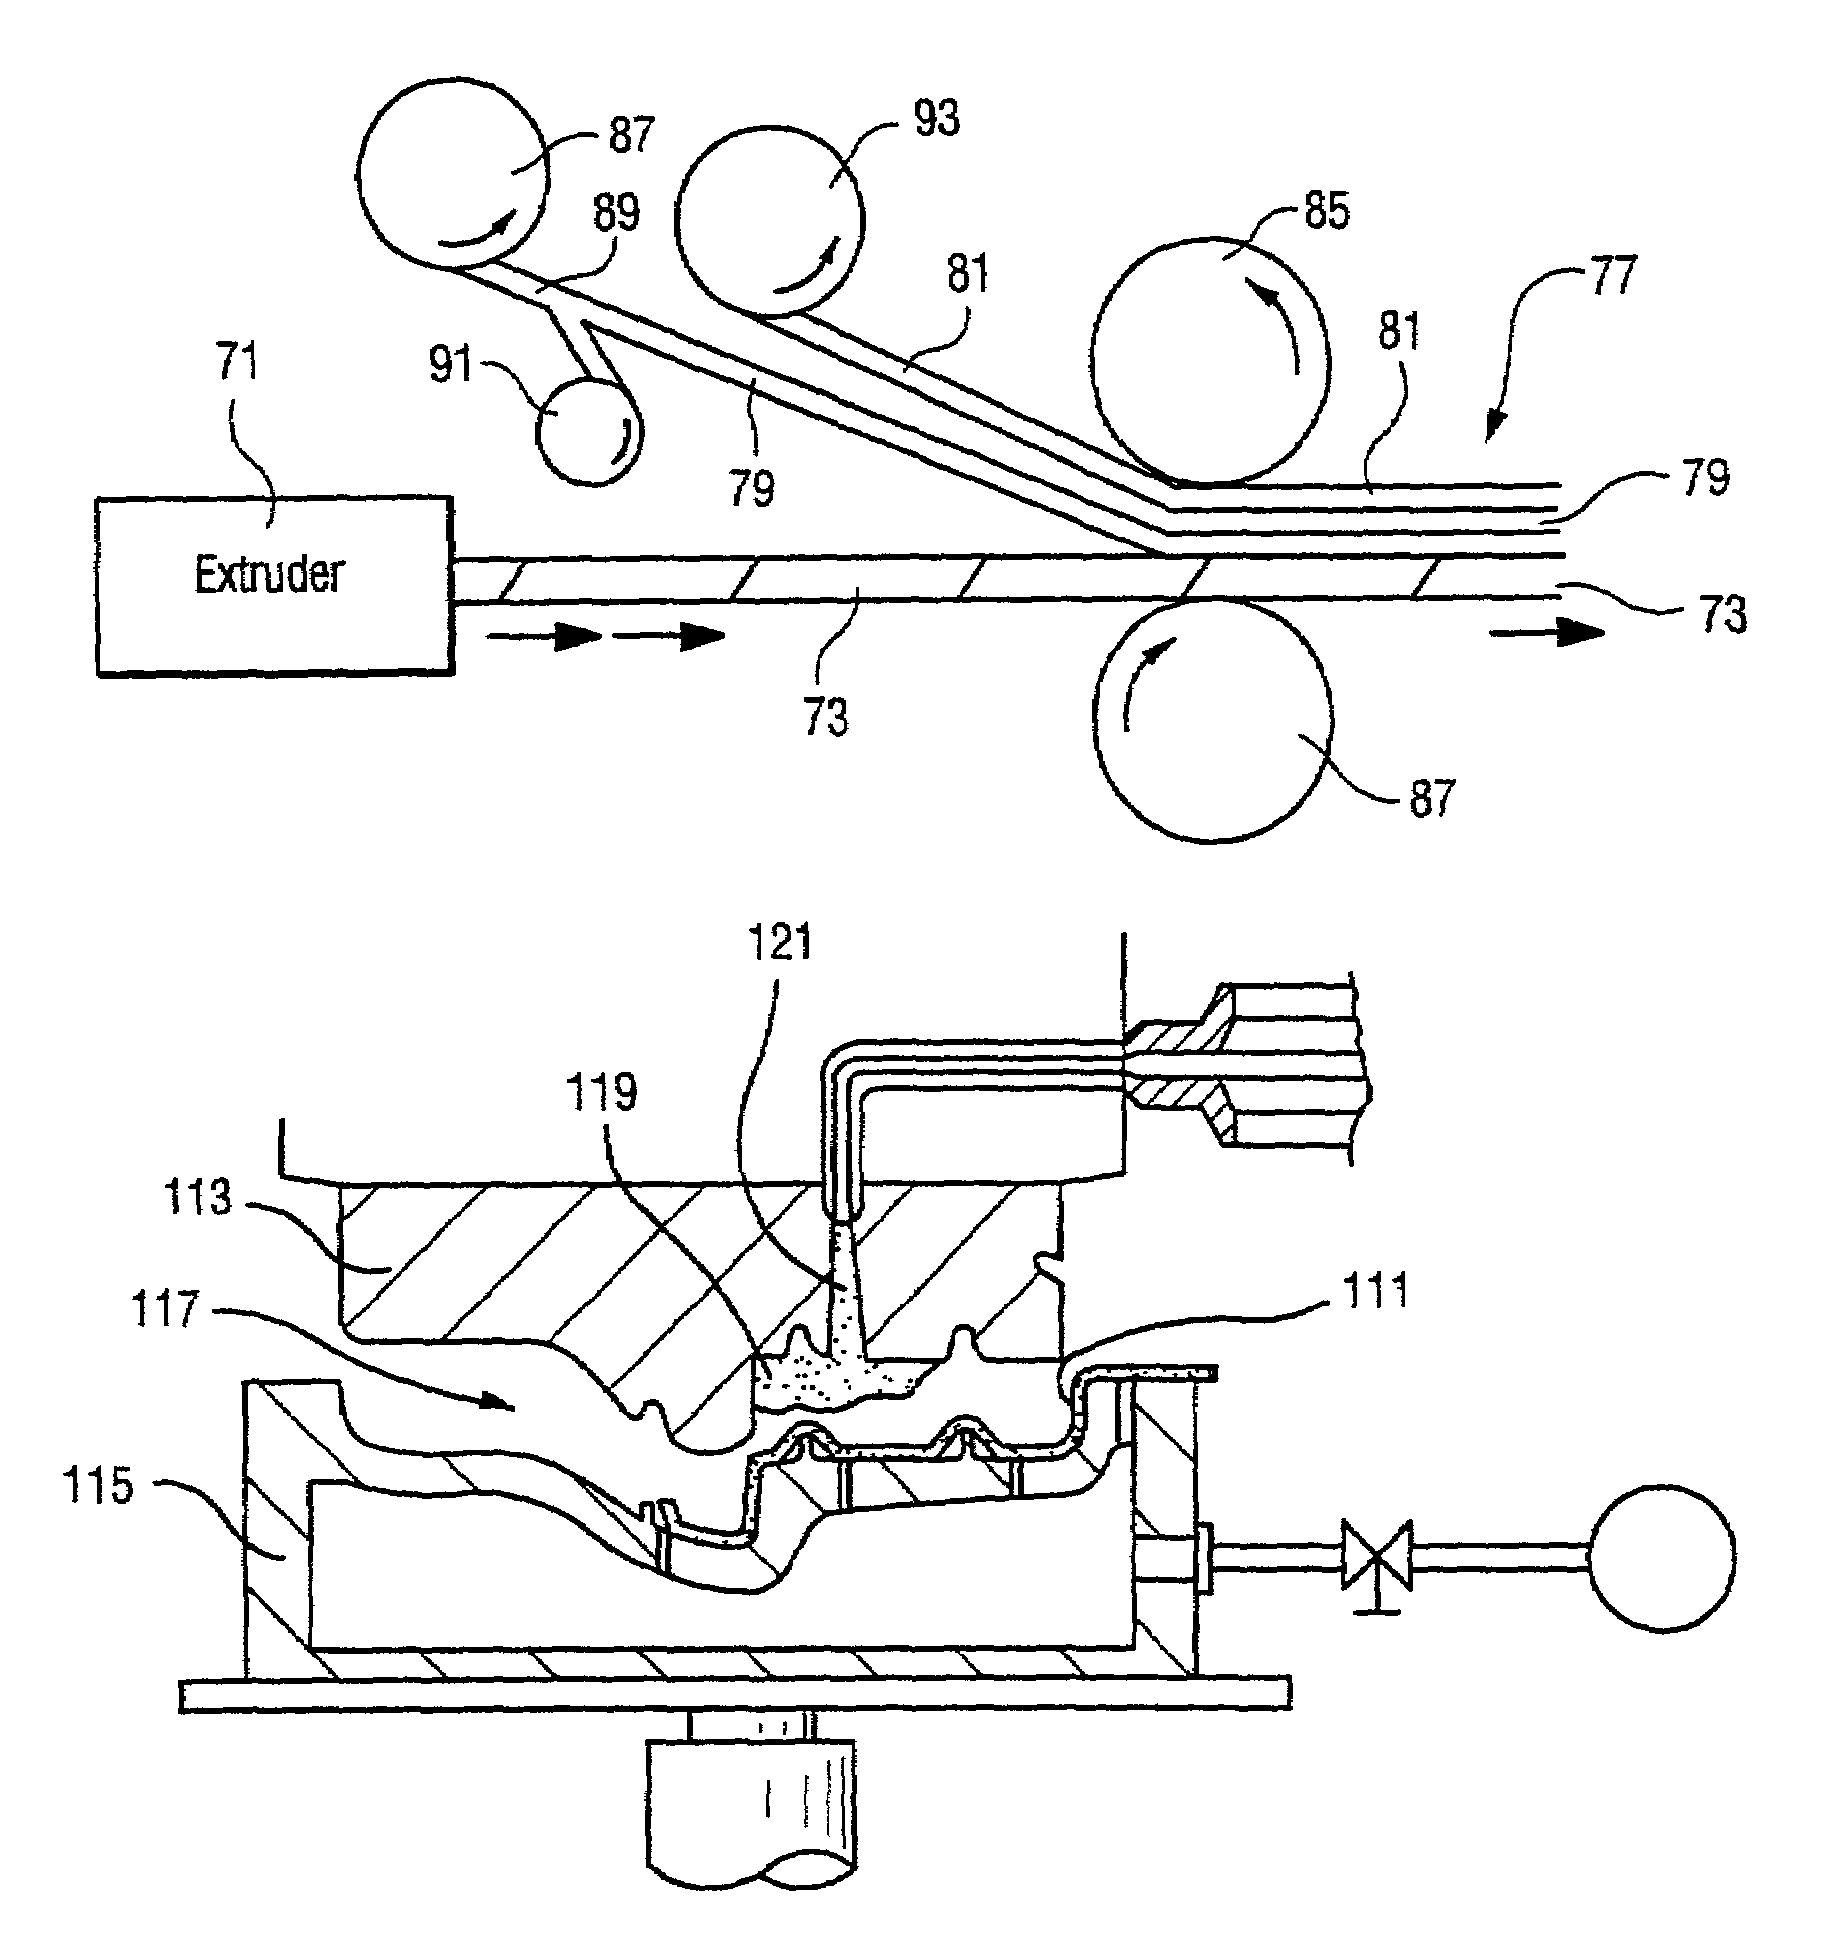 Method of making a colored automotive trim product